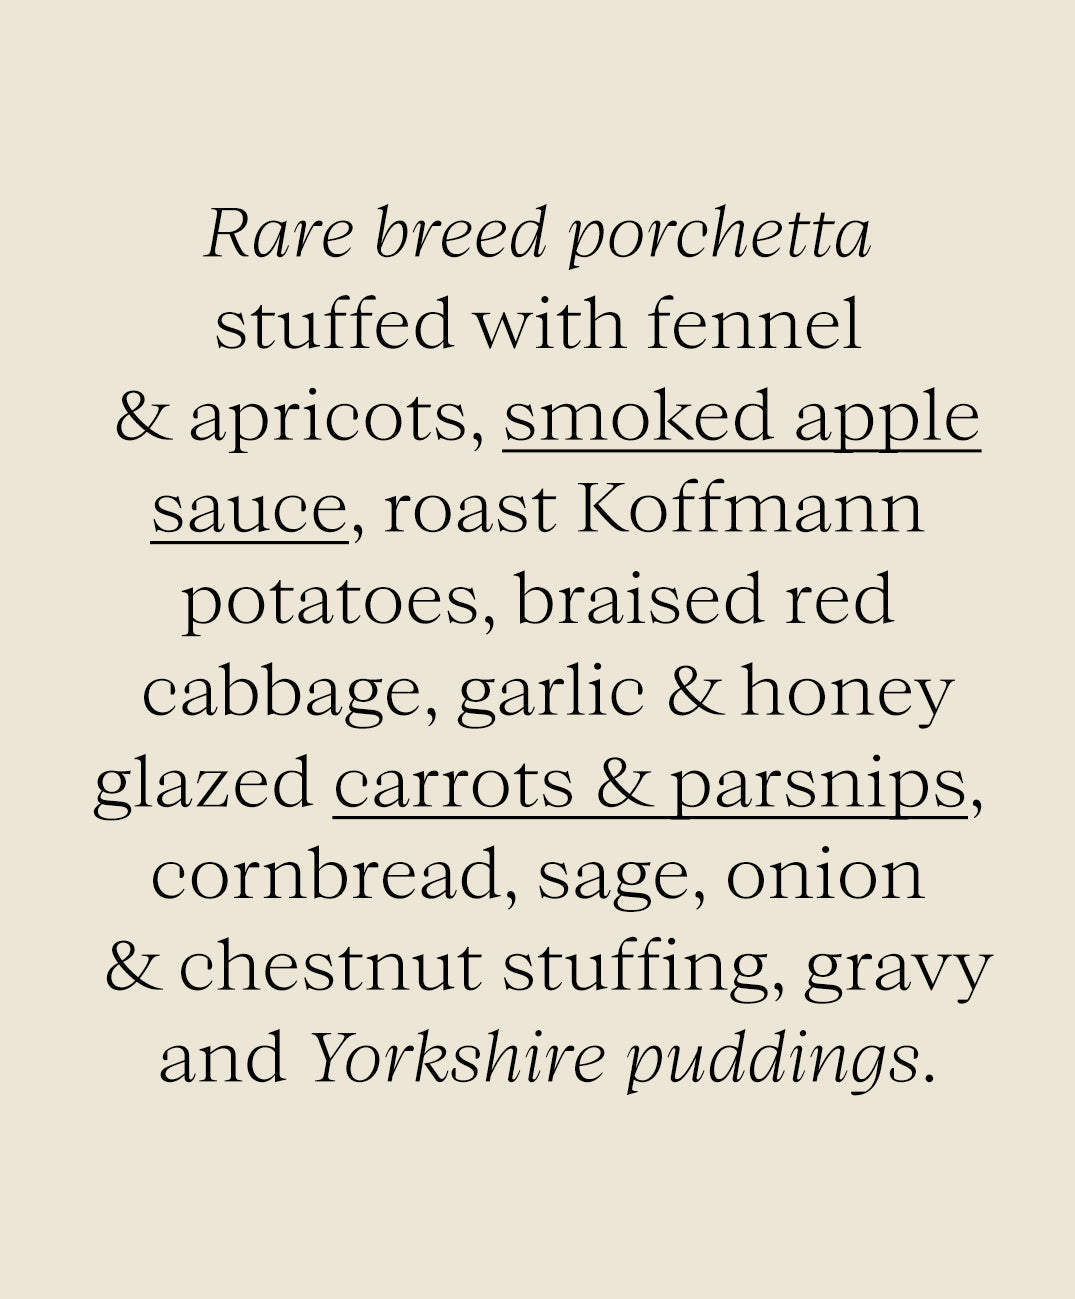 The Sunday Roast Collection - Porchetta Stuffed with Fennel and Apricots - BLACK FRIDAY SALE